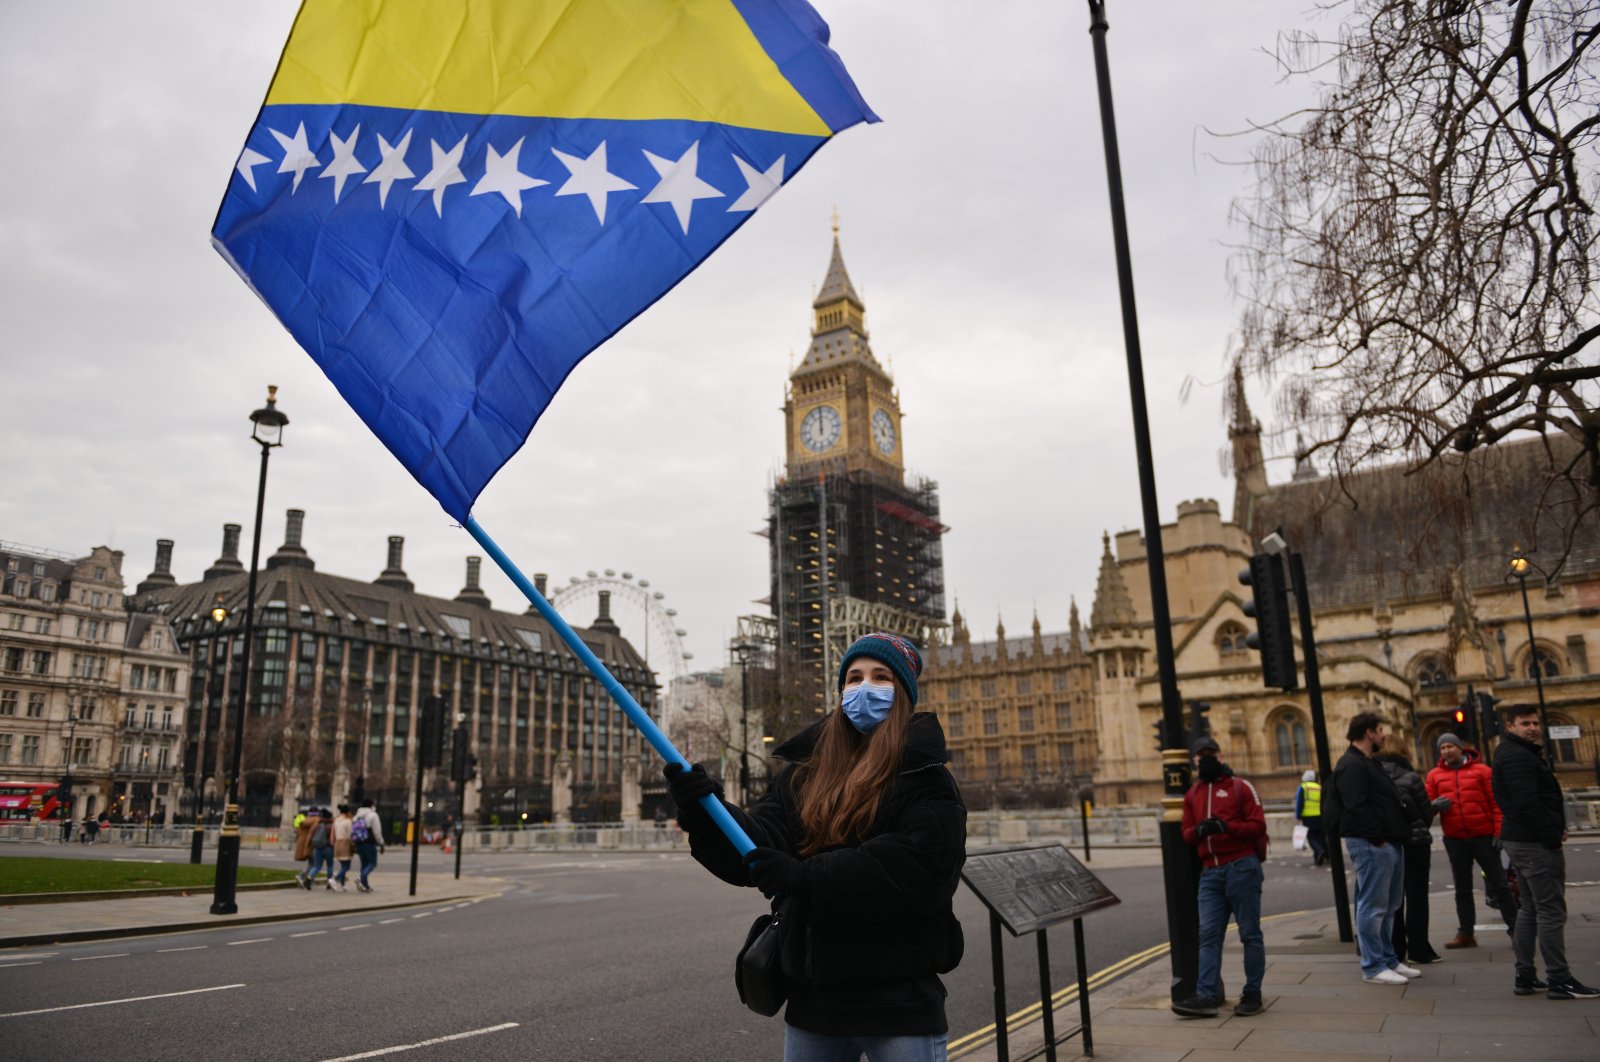 A demonstrator waves a flag during a rally to raise awareness of a potential new Bosnian crisis, at Parliament Square in London, U.K., Jan. 10, 2022. (AP Photo)